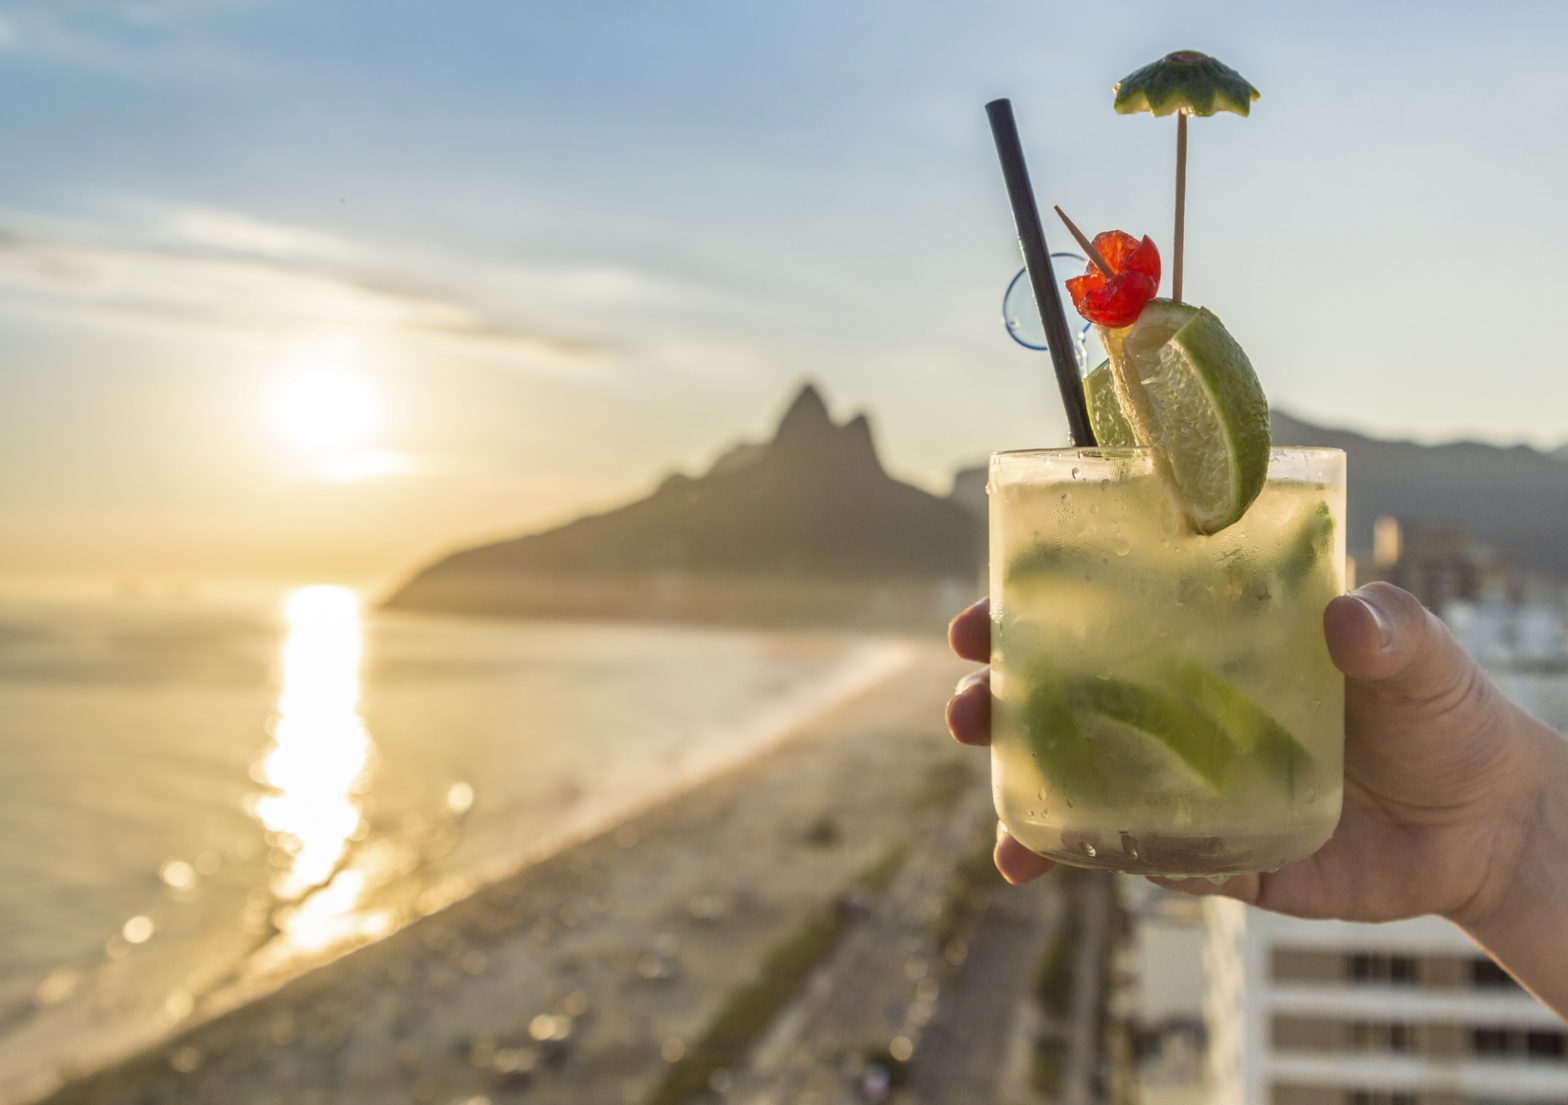 Common (or Not) Portuguese Phrases for Your Trip to Rio [Infographic]